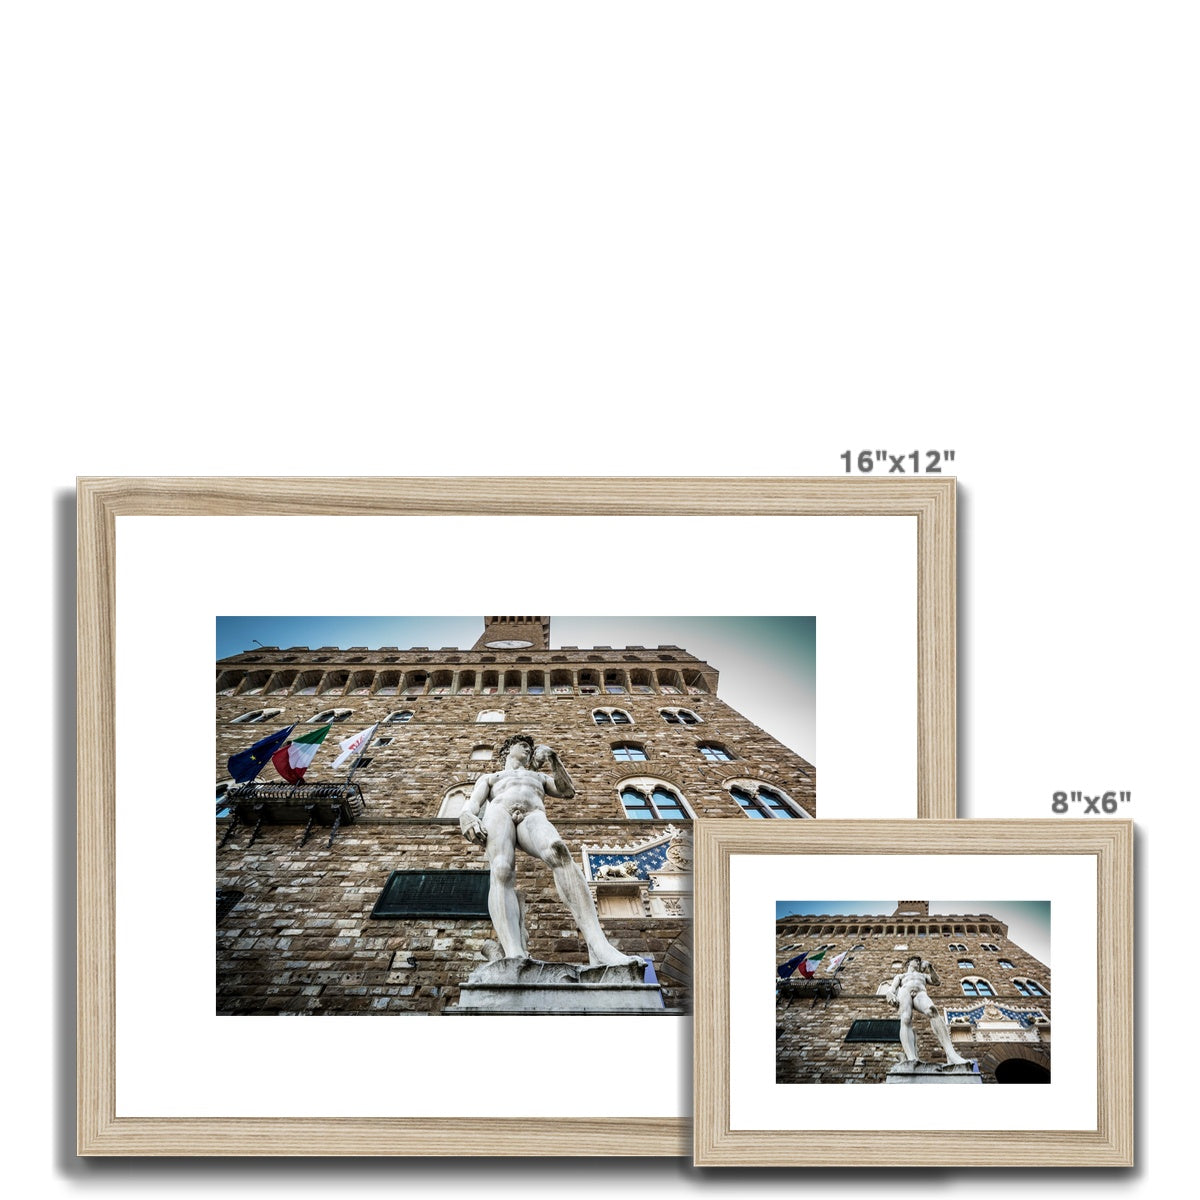 Statue of David overlooking Piazza della Signoria, with Palazzo Vecchio behind. Florence, Italy. Framed & Mounted Print